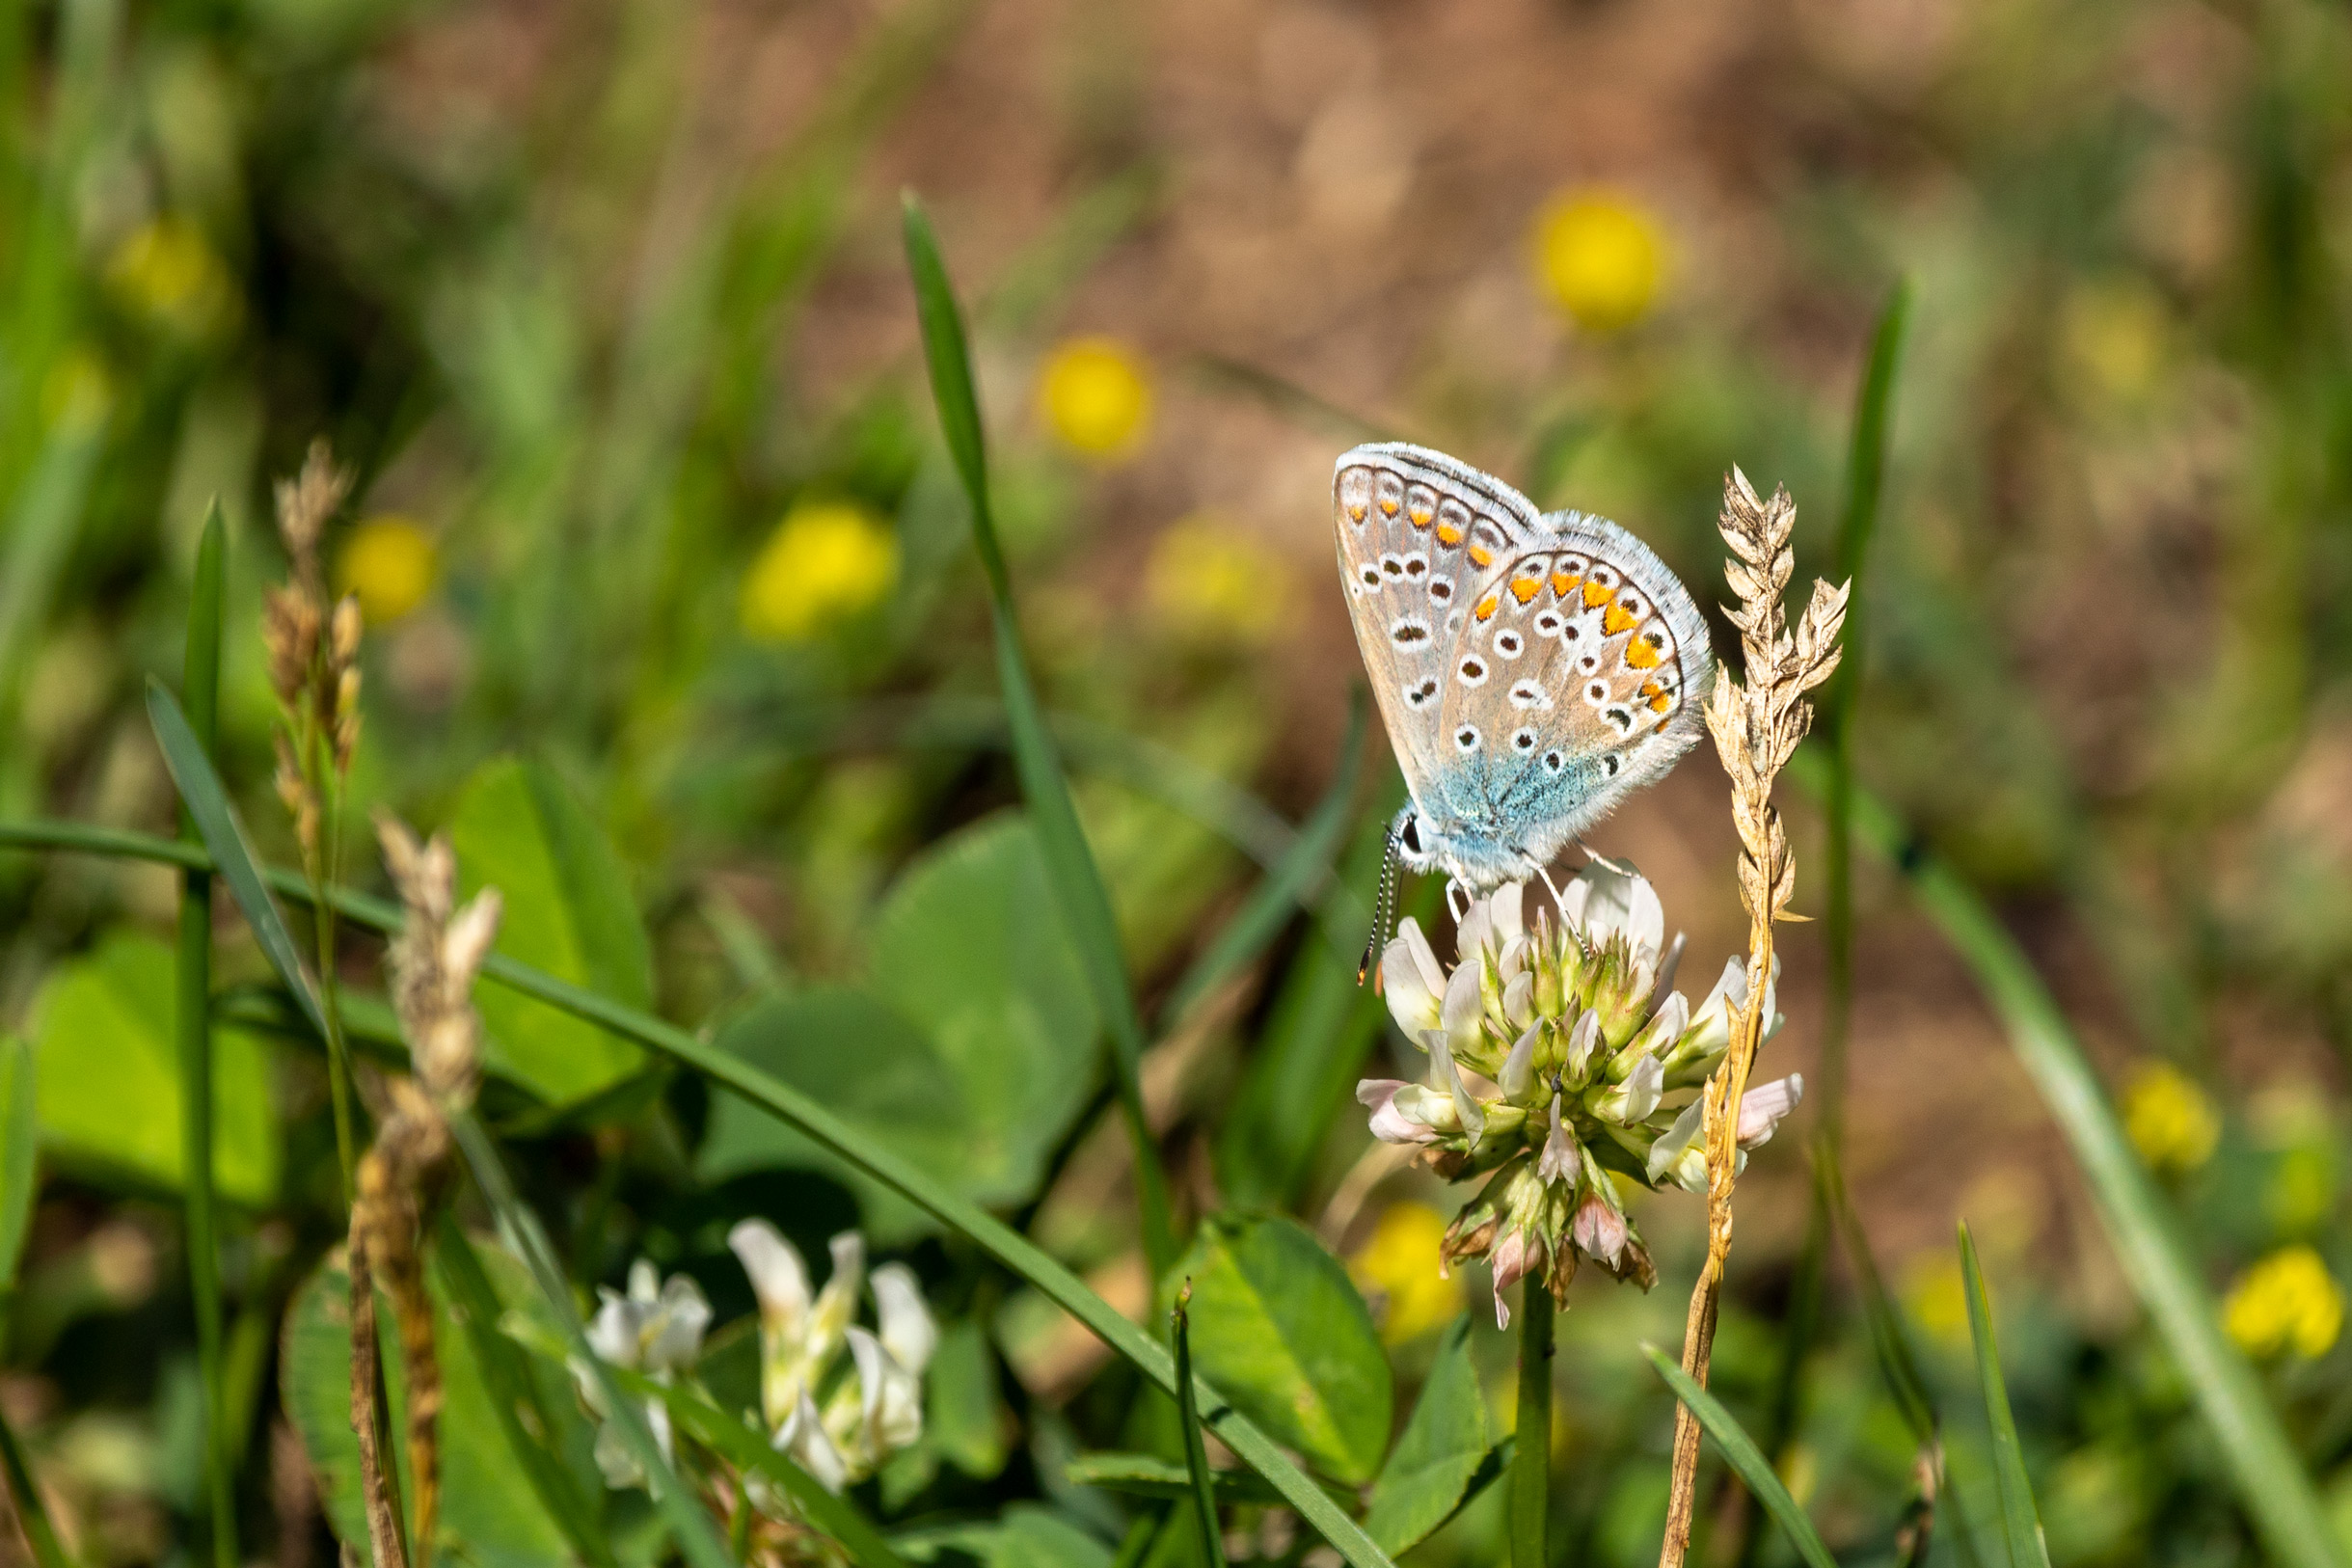 Small butterfly with spotted blue, orange, black and white wings on a clover flower